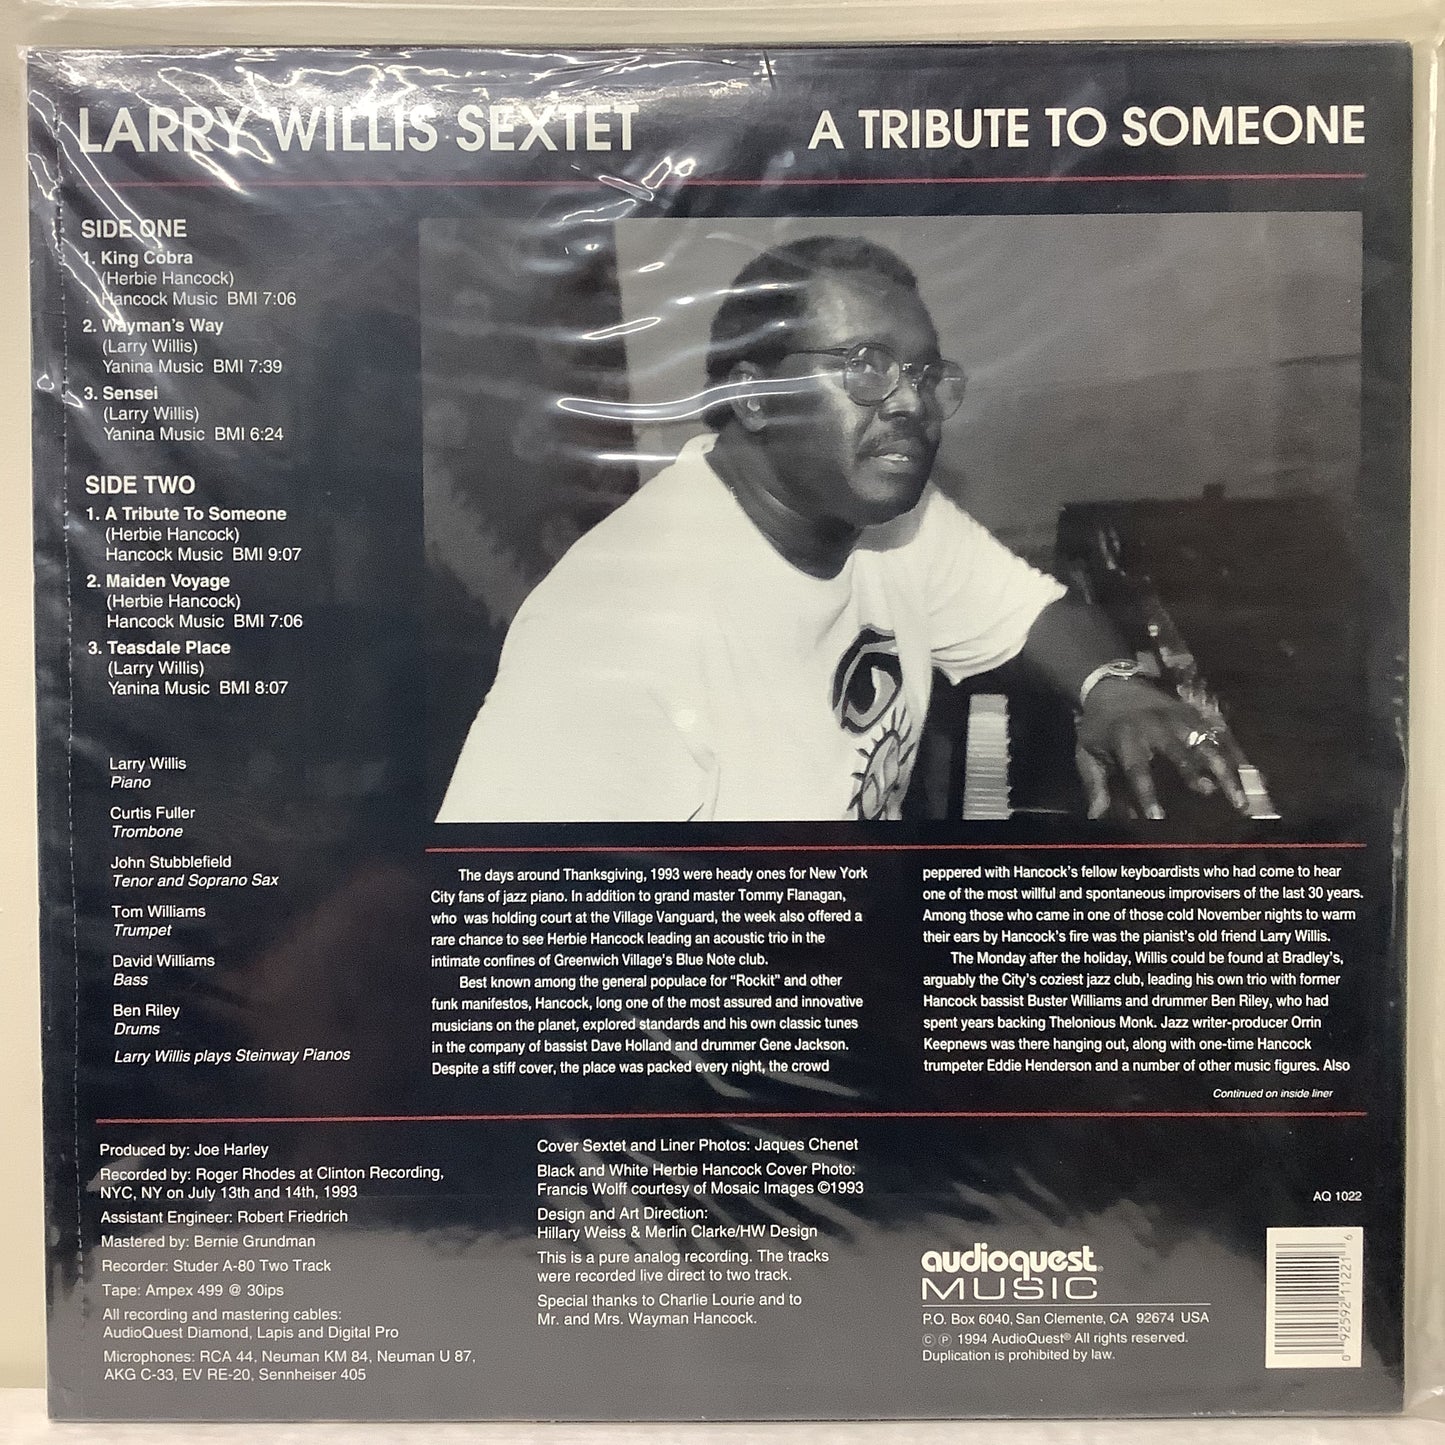 Larry Willis - A Tribute To Someone - Audioquest LP